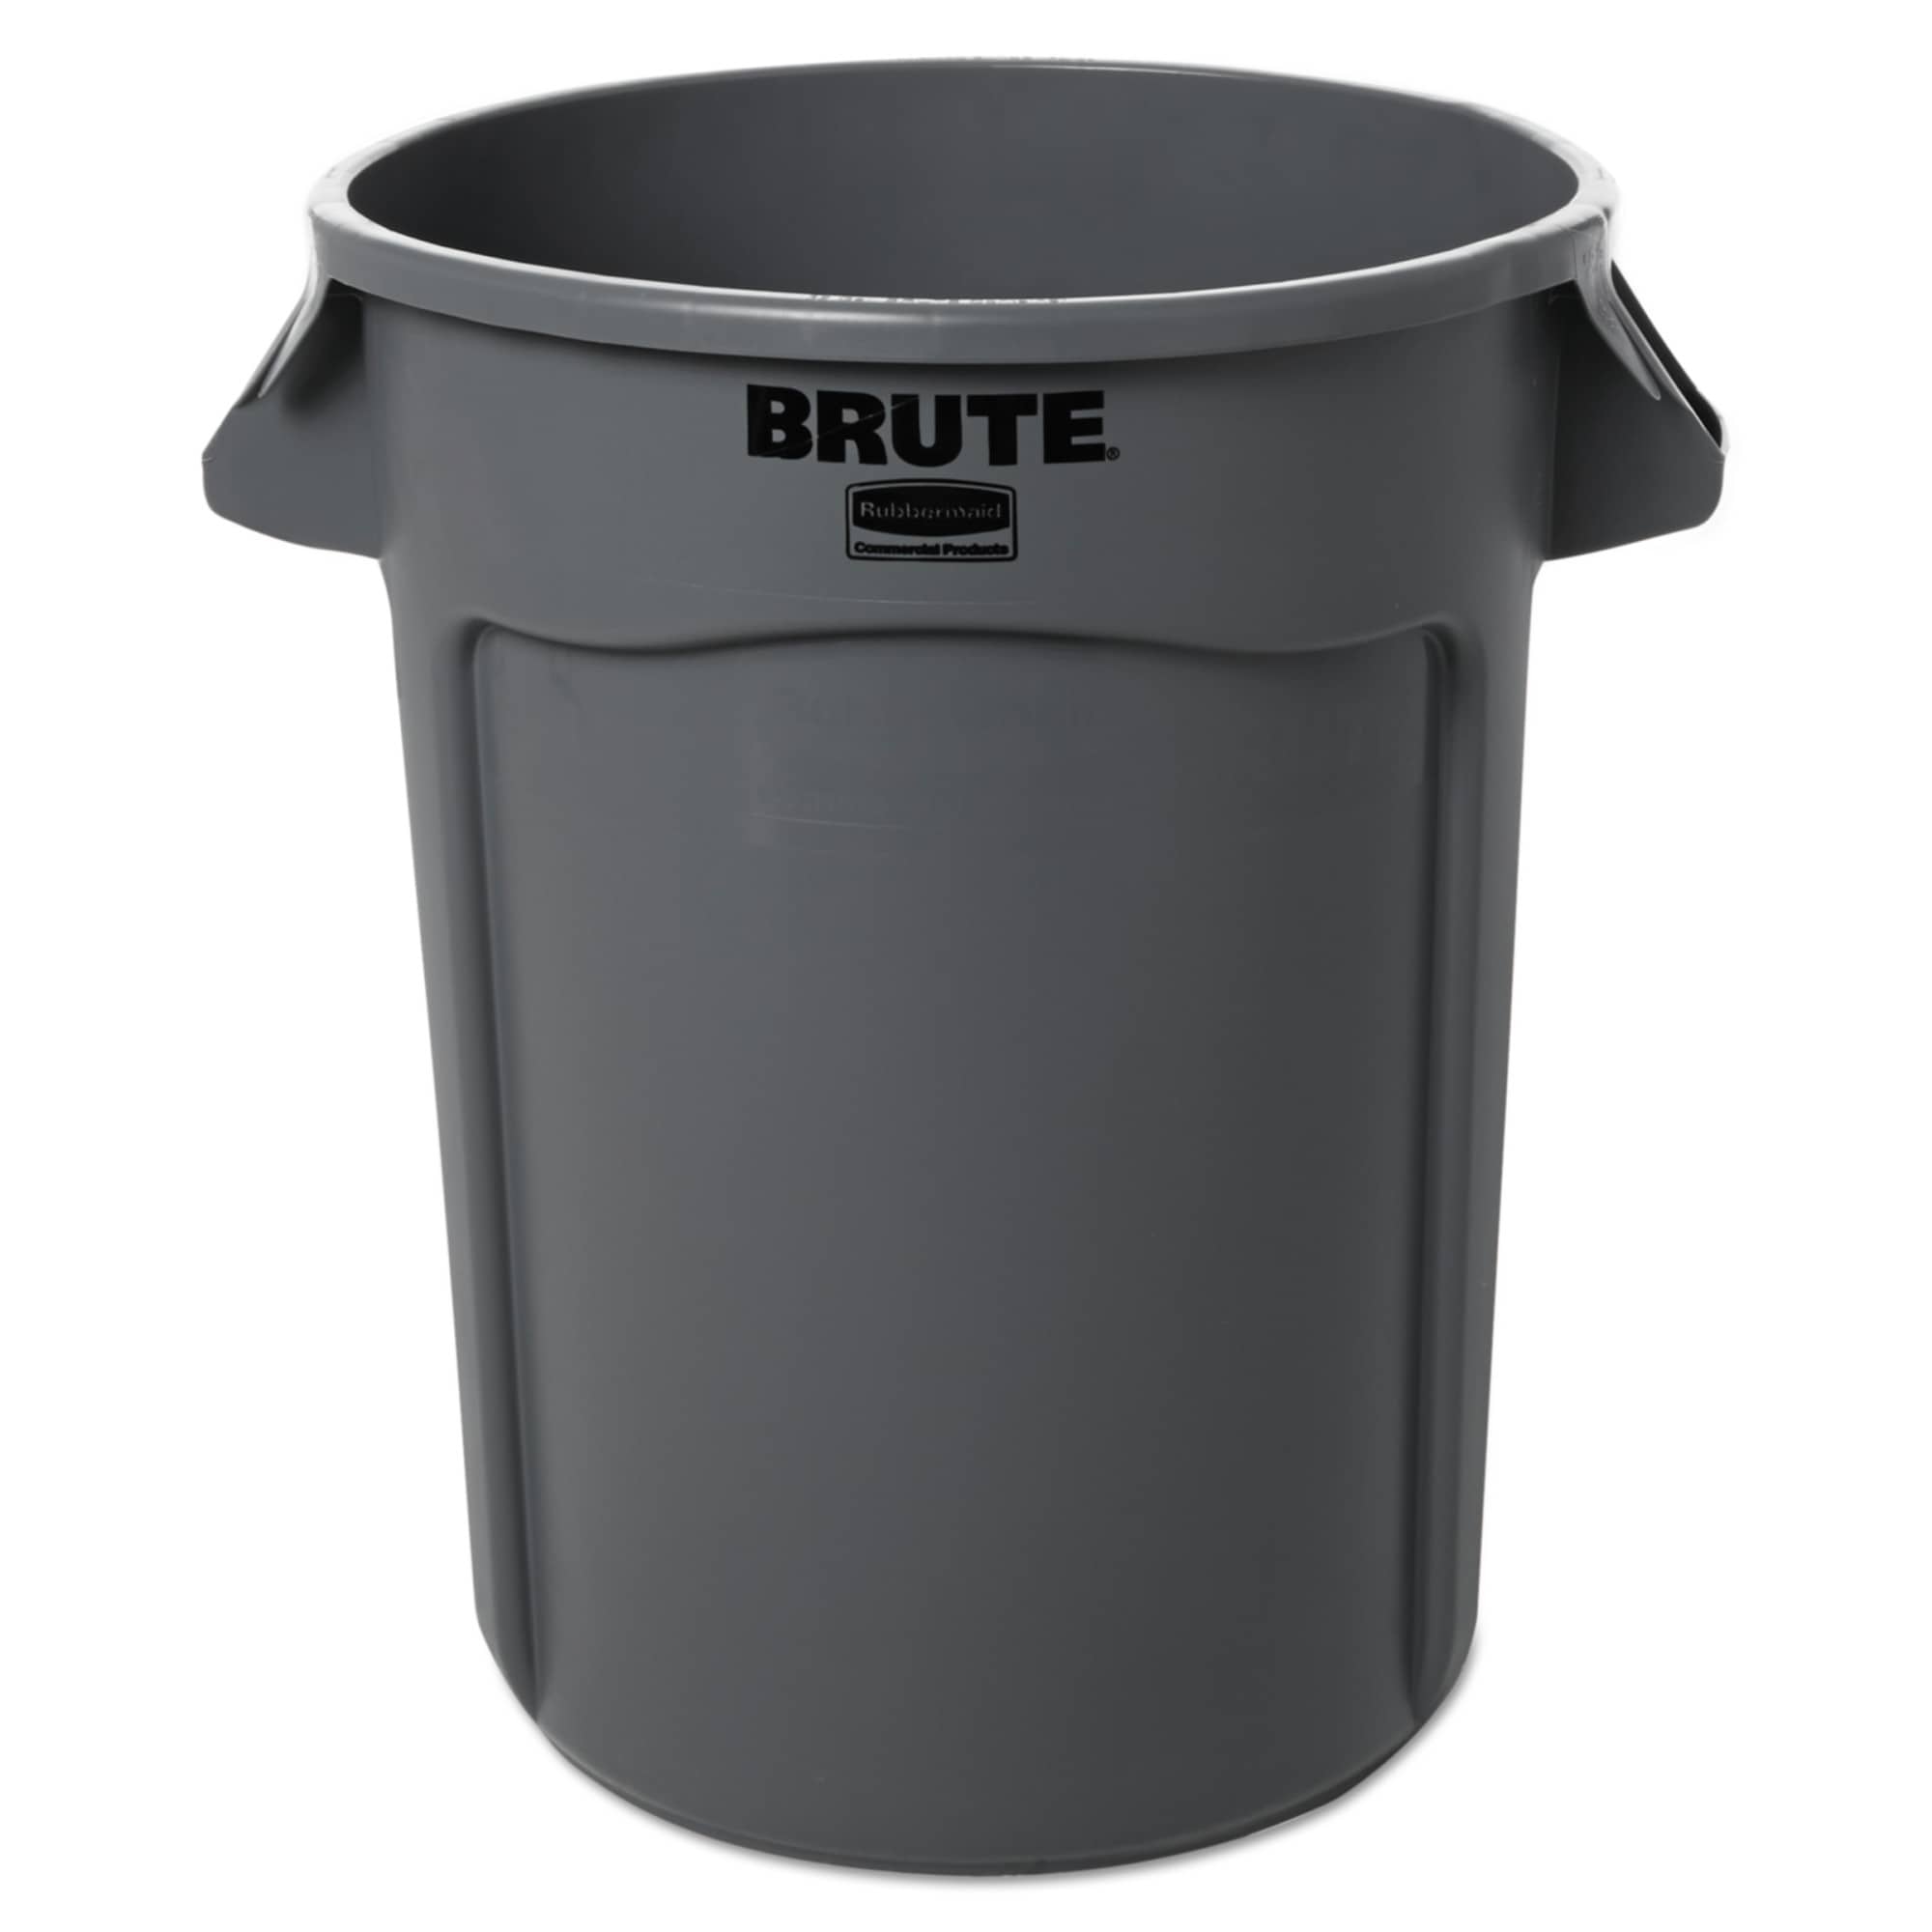 32 gal. Heavy-Duty Trash/Garbage Can, Waste Container Home/Garage/Mall